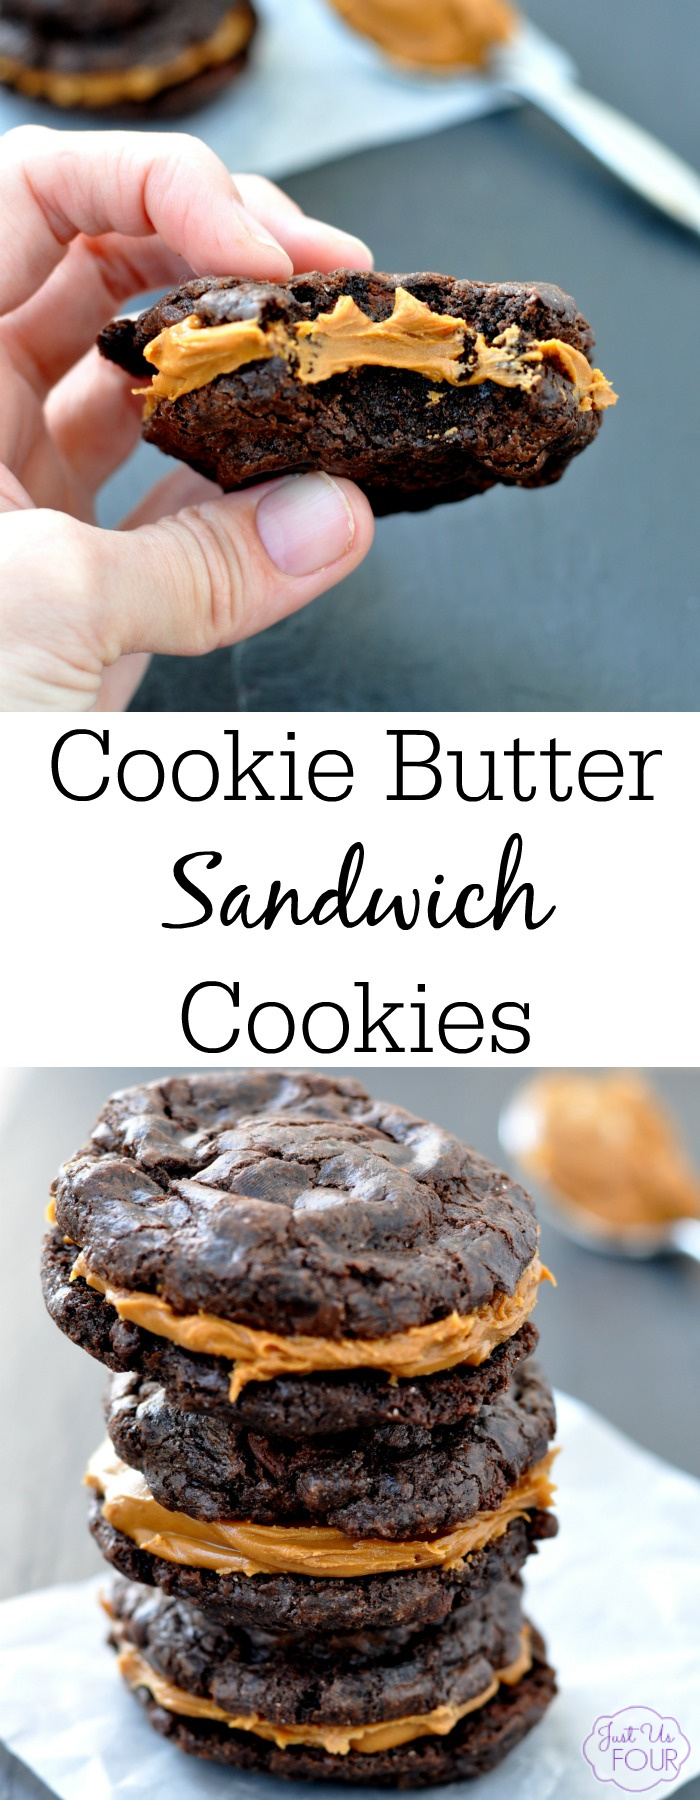 Two amazing fudge cookies with cookie butter sandwiched in between. This cookie recipe is to die for and makes the perfect decadent dessert.